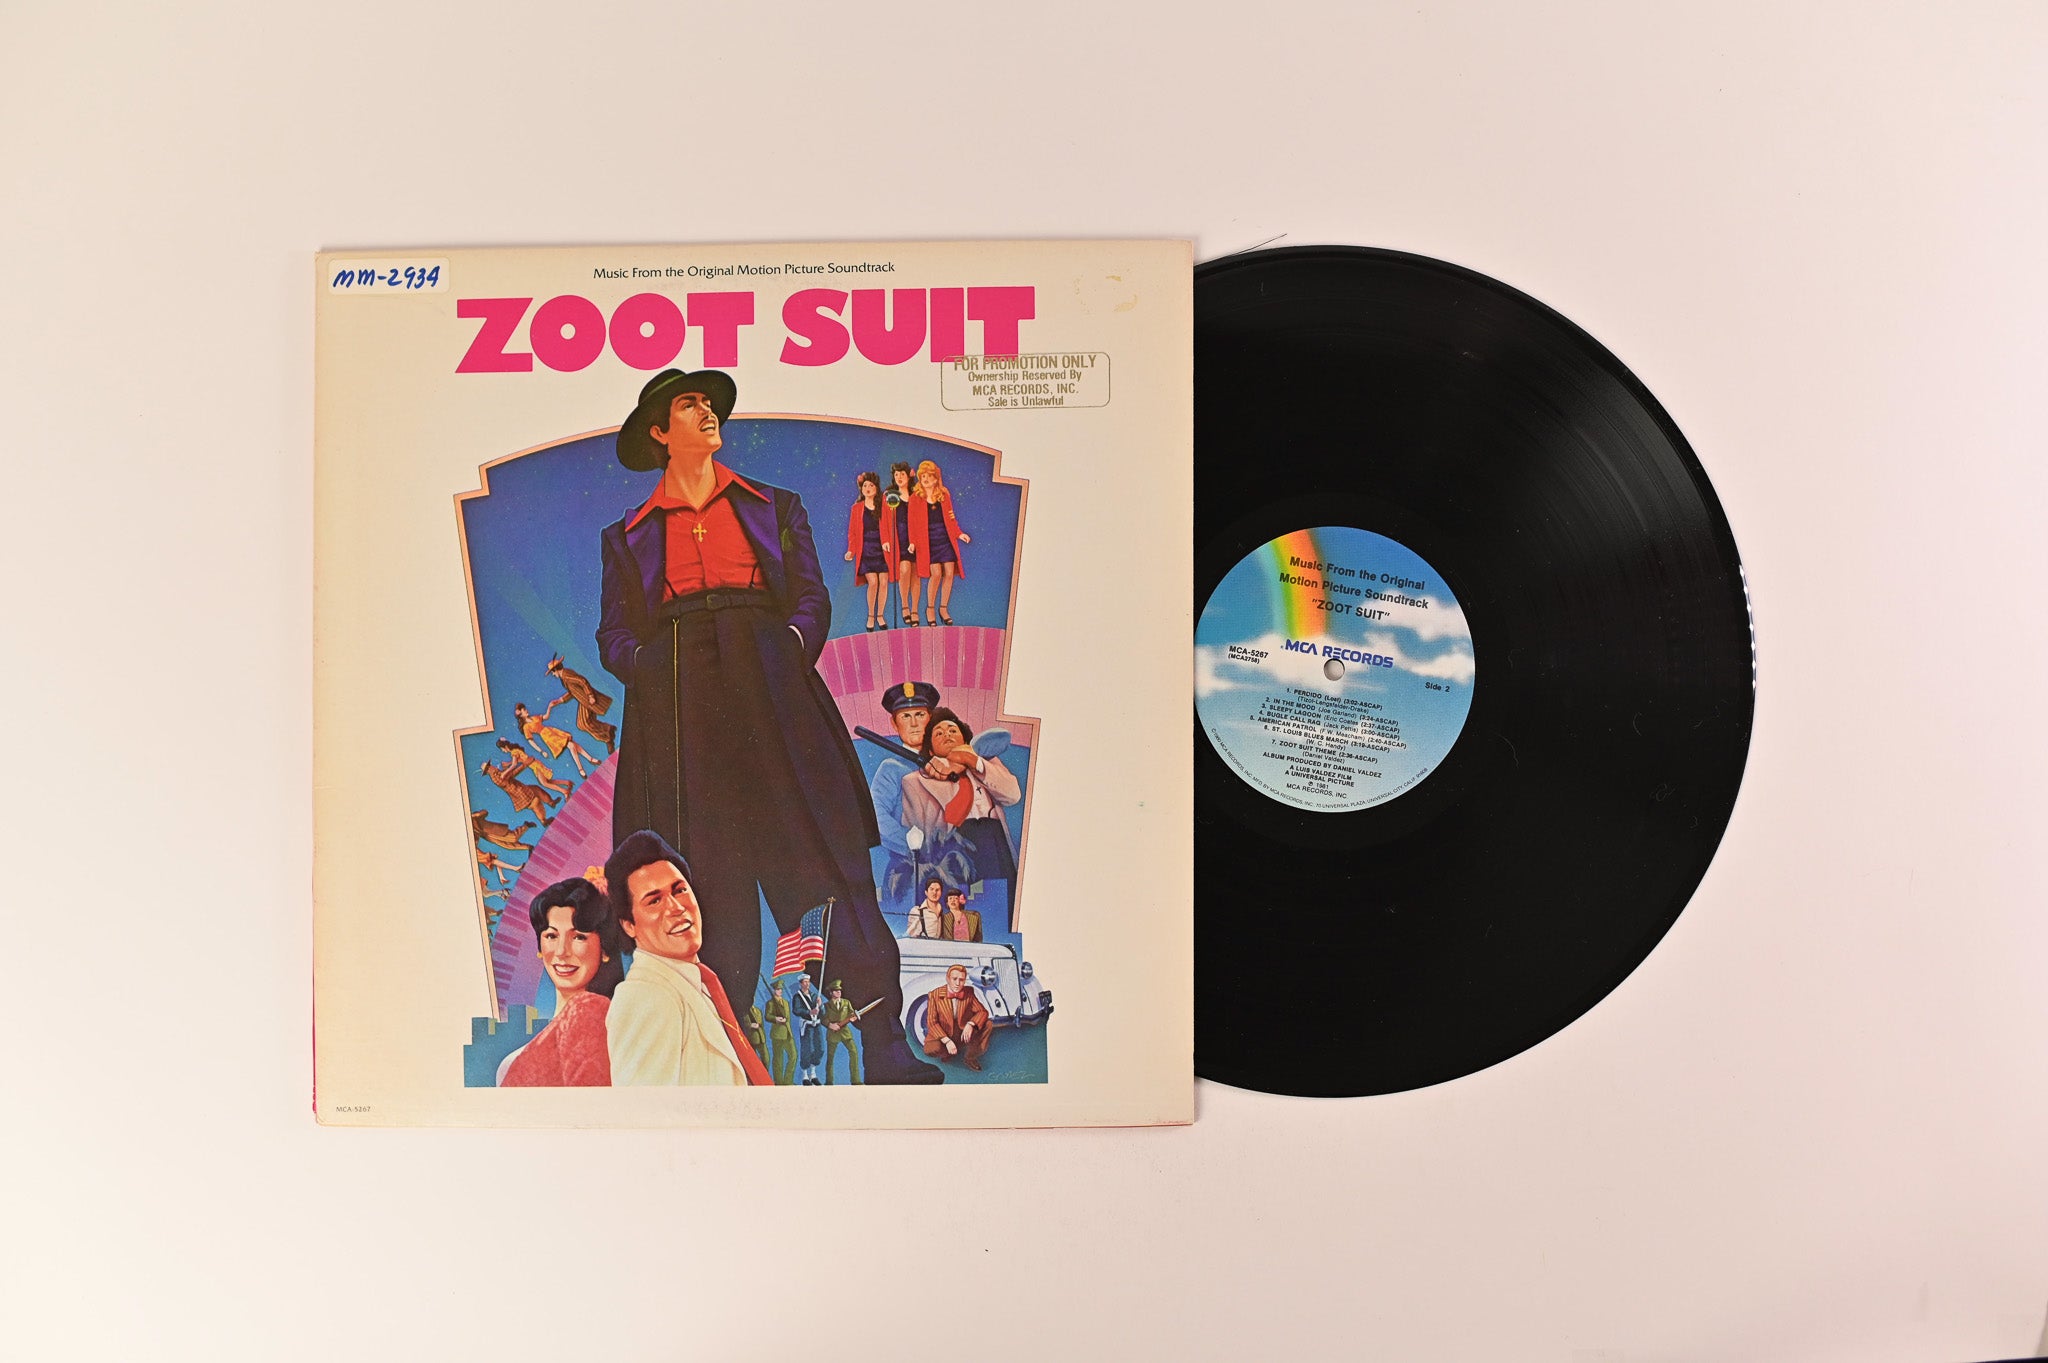 Daniel Valdez - Zoot Suit - Music From The Original Motion Picture Soundtrack on MCA Records